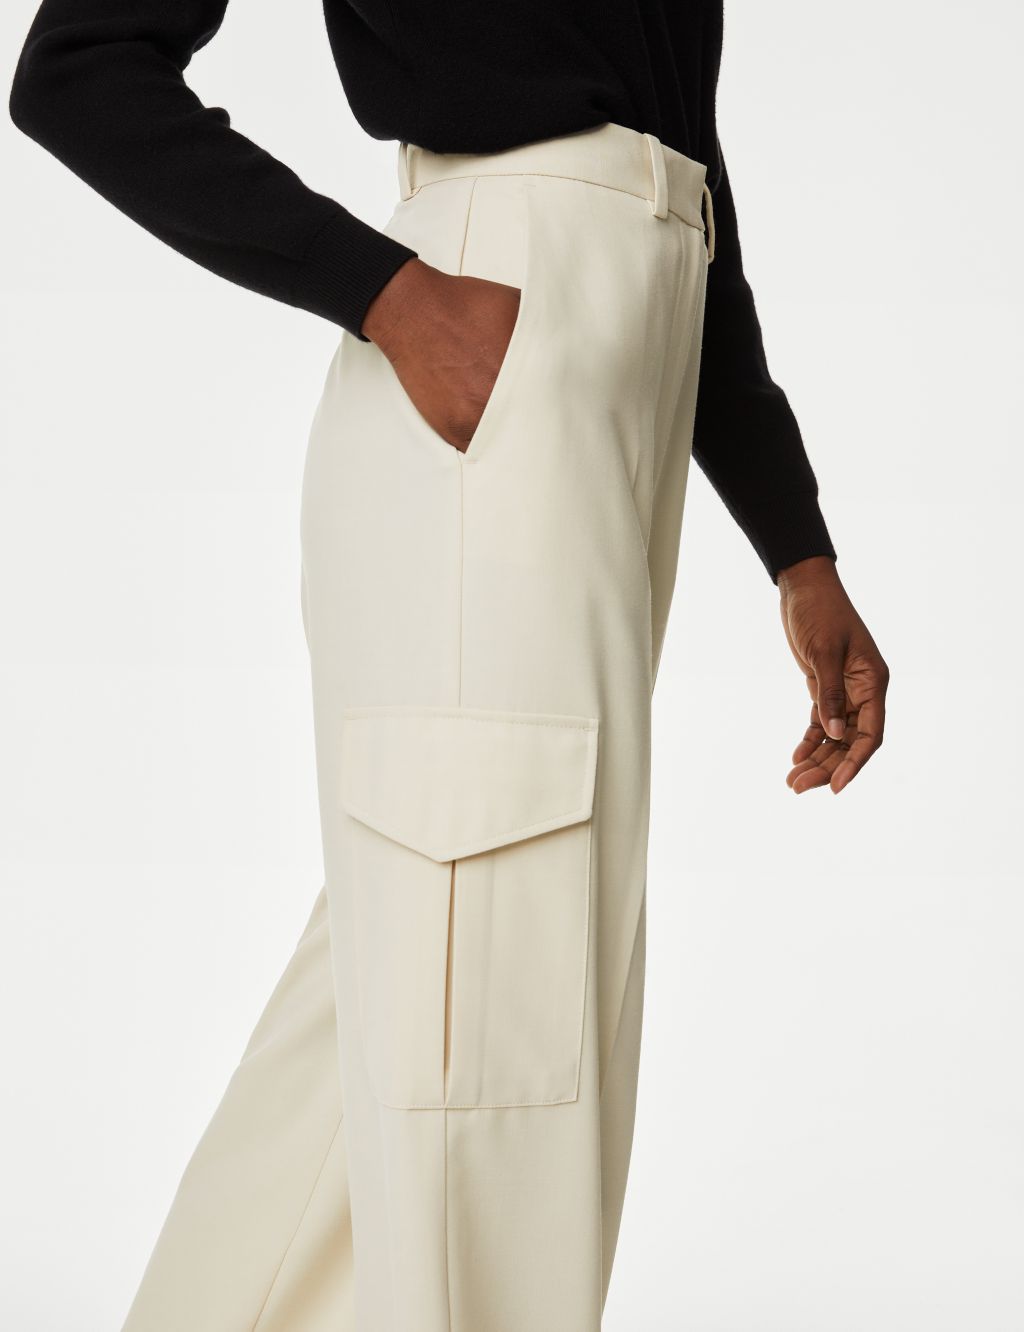 Cargo Wide Leg Trousers image 3